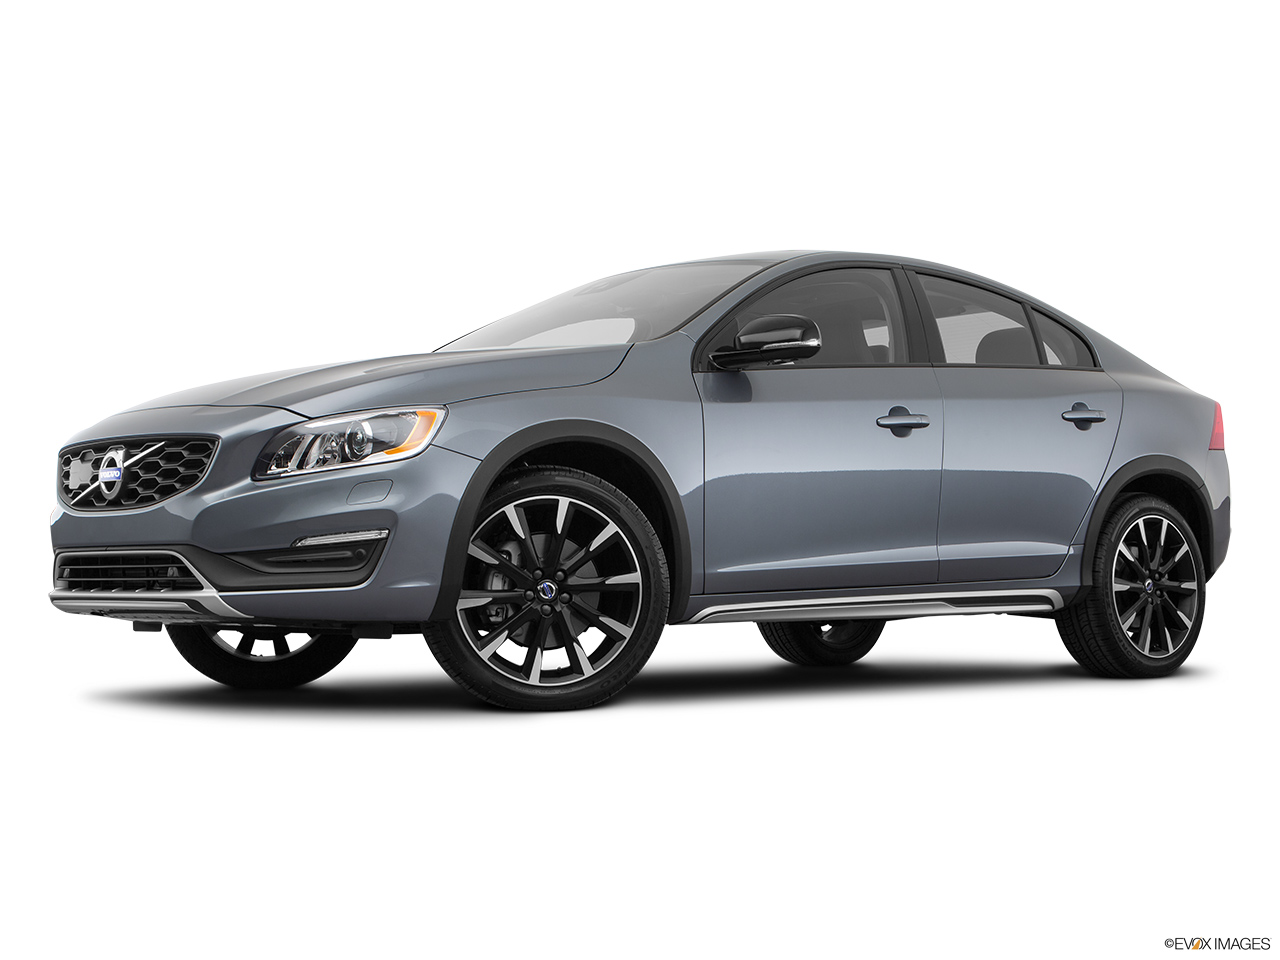 2017 Volvo S60 Cross Country T5 AWD Low/wide front 5/8. 